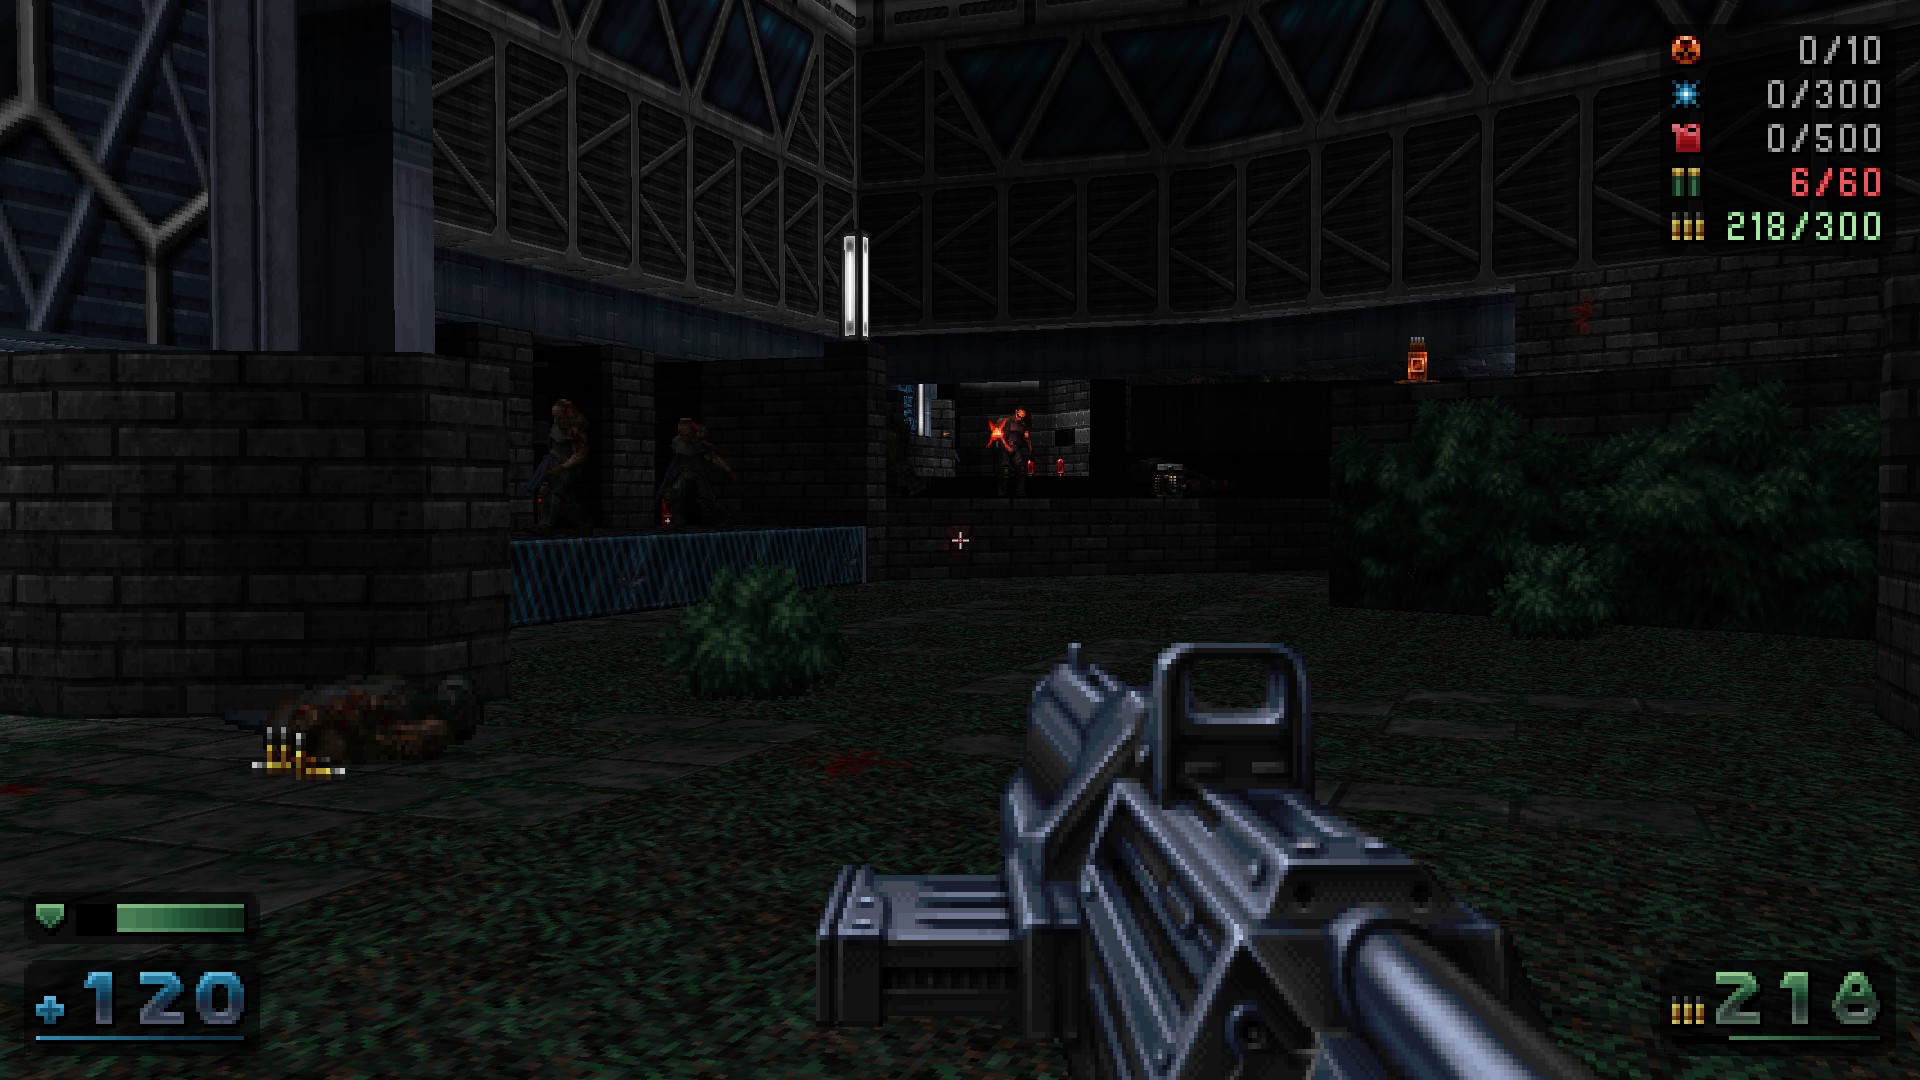 Your player walking through a dark area with Assault Rifle in hand and pixelated enemies all around.